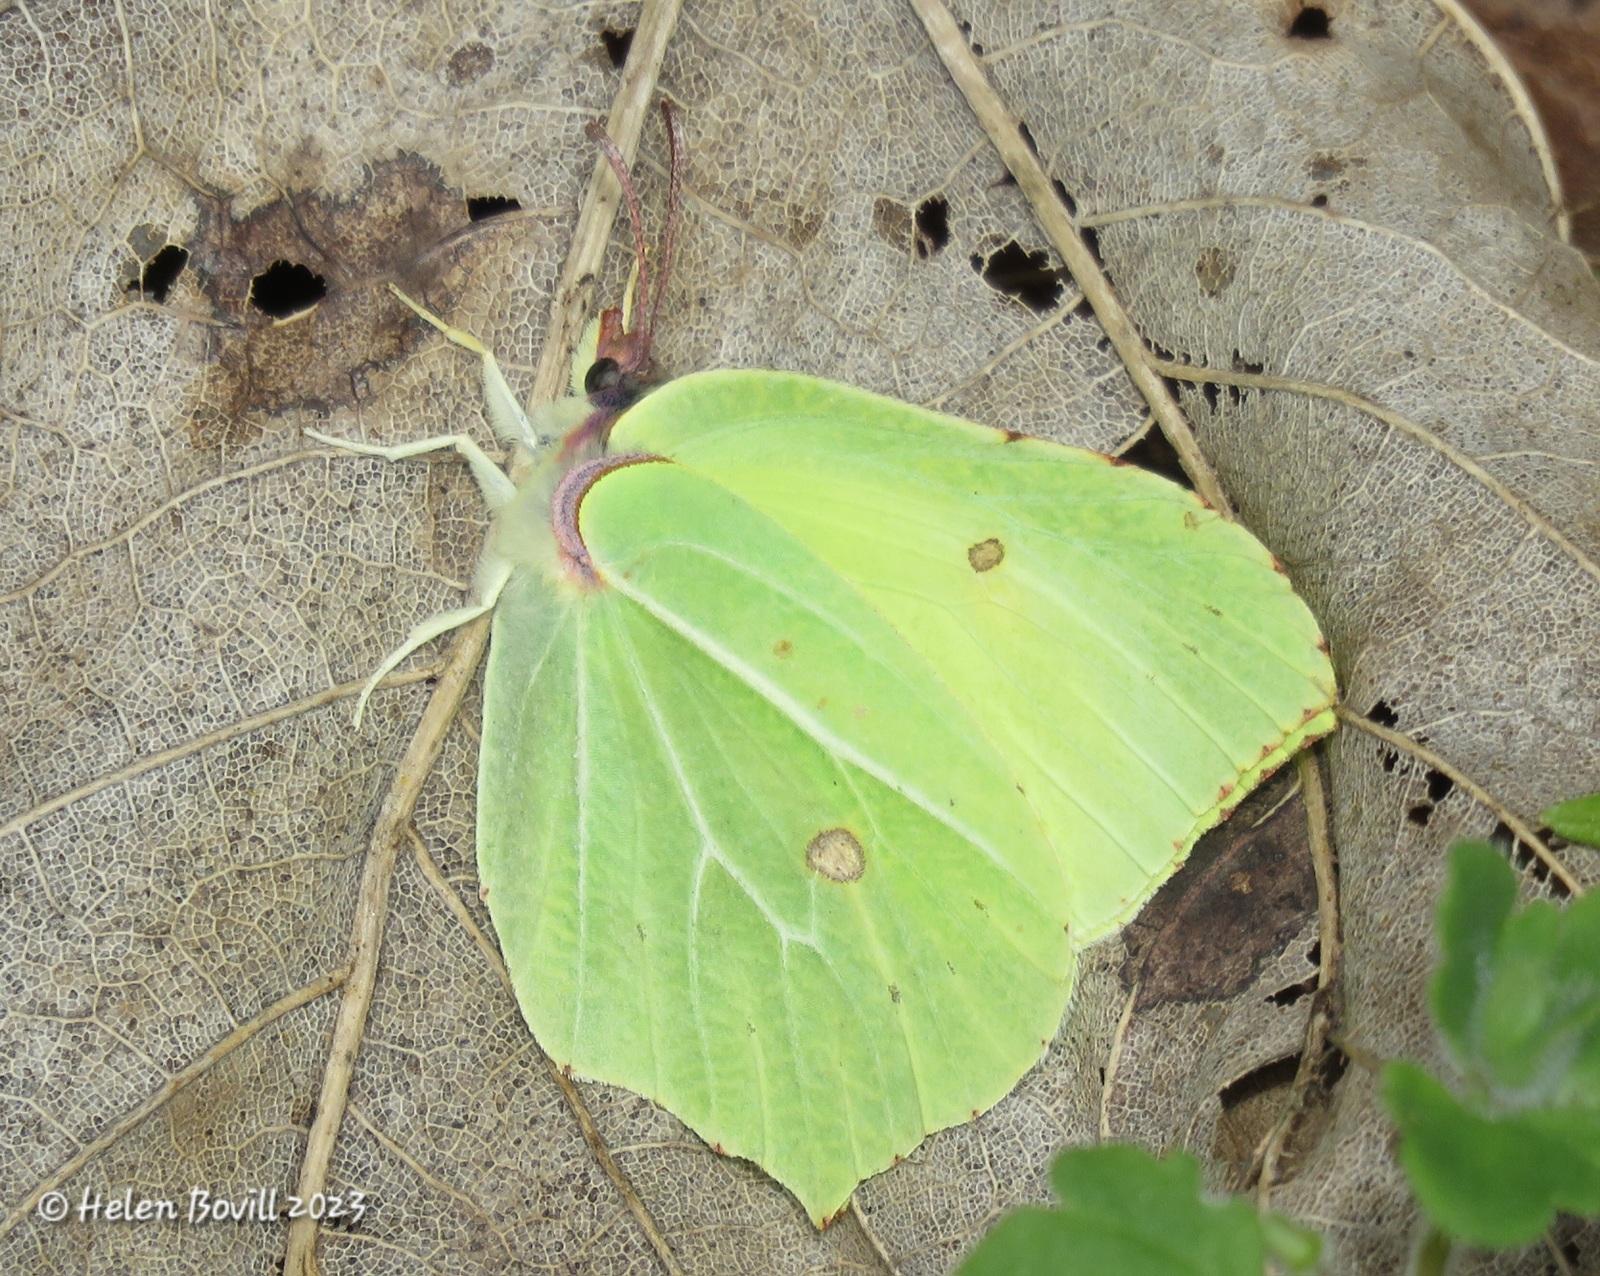 A male Brimstone Butterfly resting on a dried out leaf